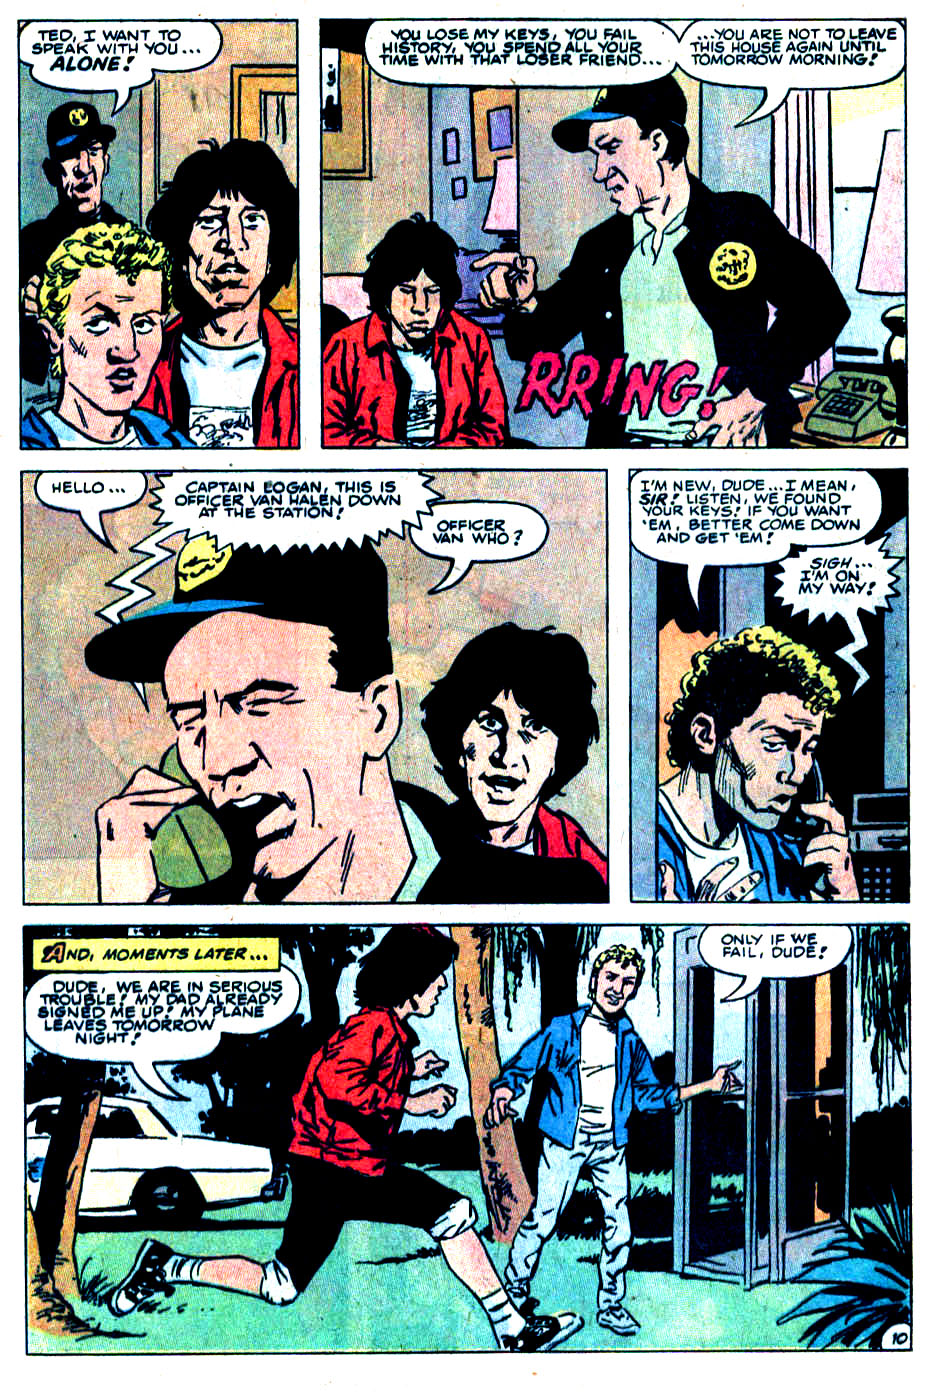 Read online Bill & Ted's Excellent Adventure comic -  Issue # Full - 10